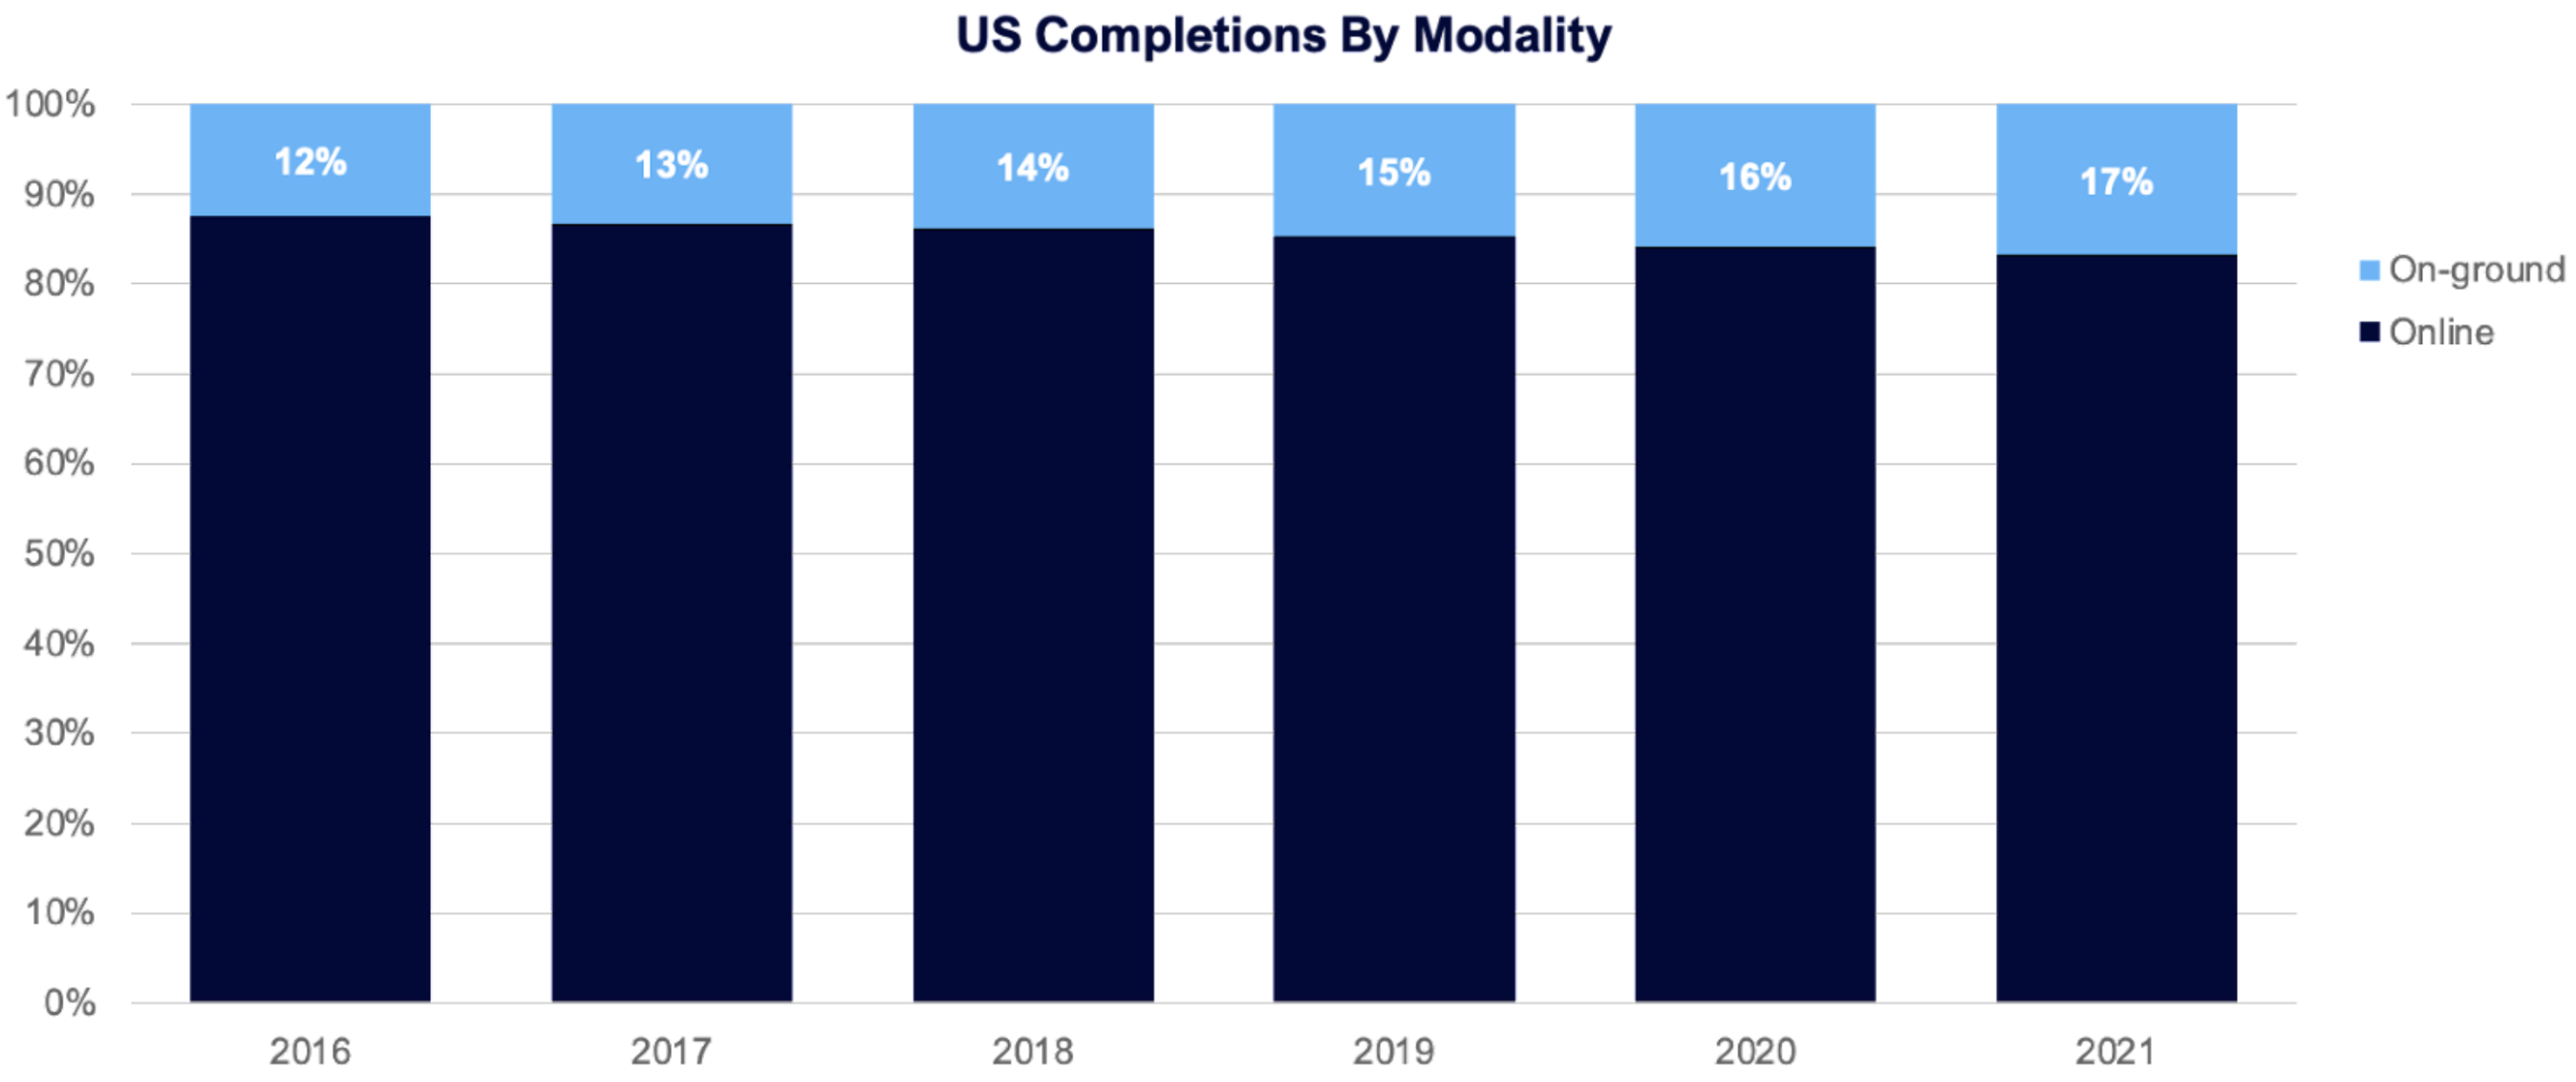 US completions by modality